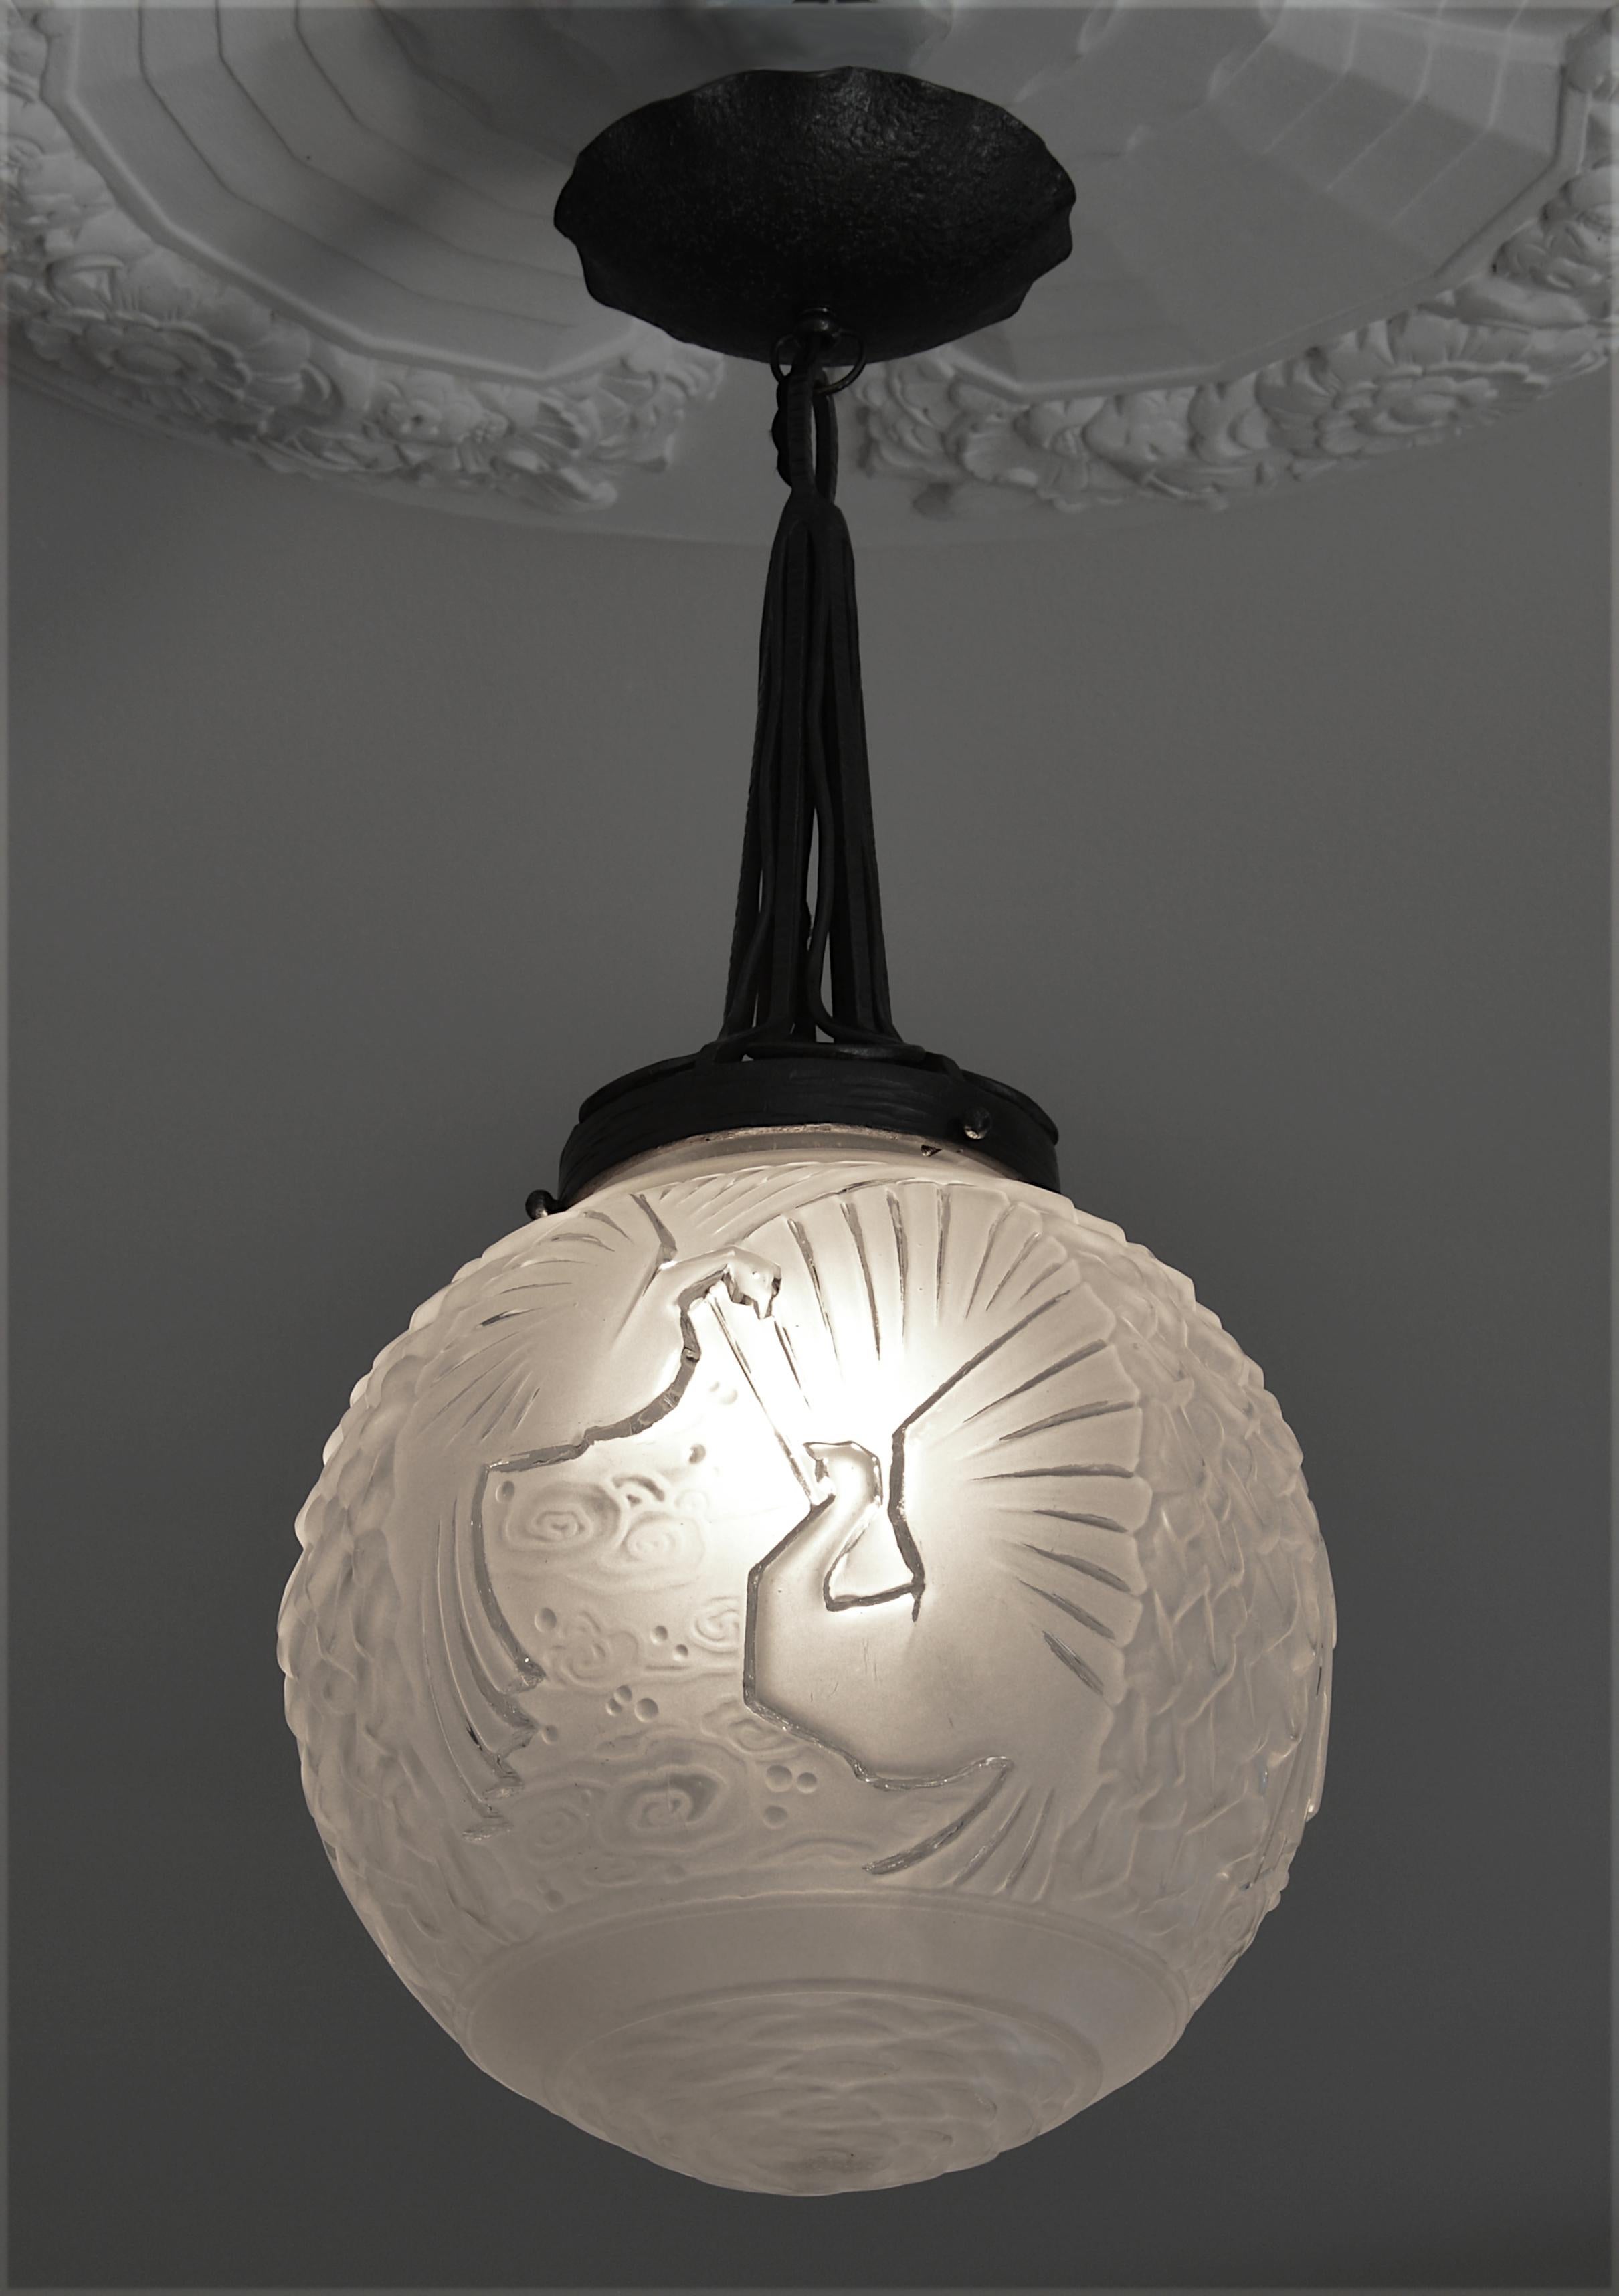 French Art Deco ceiling-light by Muller Freres (Luneville), France, ca.1925. Glass and wrought-iron. Thick and large frosted glass shade with its wrought-iron fixture. 6 paradise birds in the sky. Measures: Height: 23.6